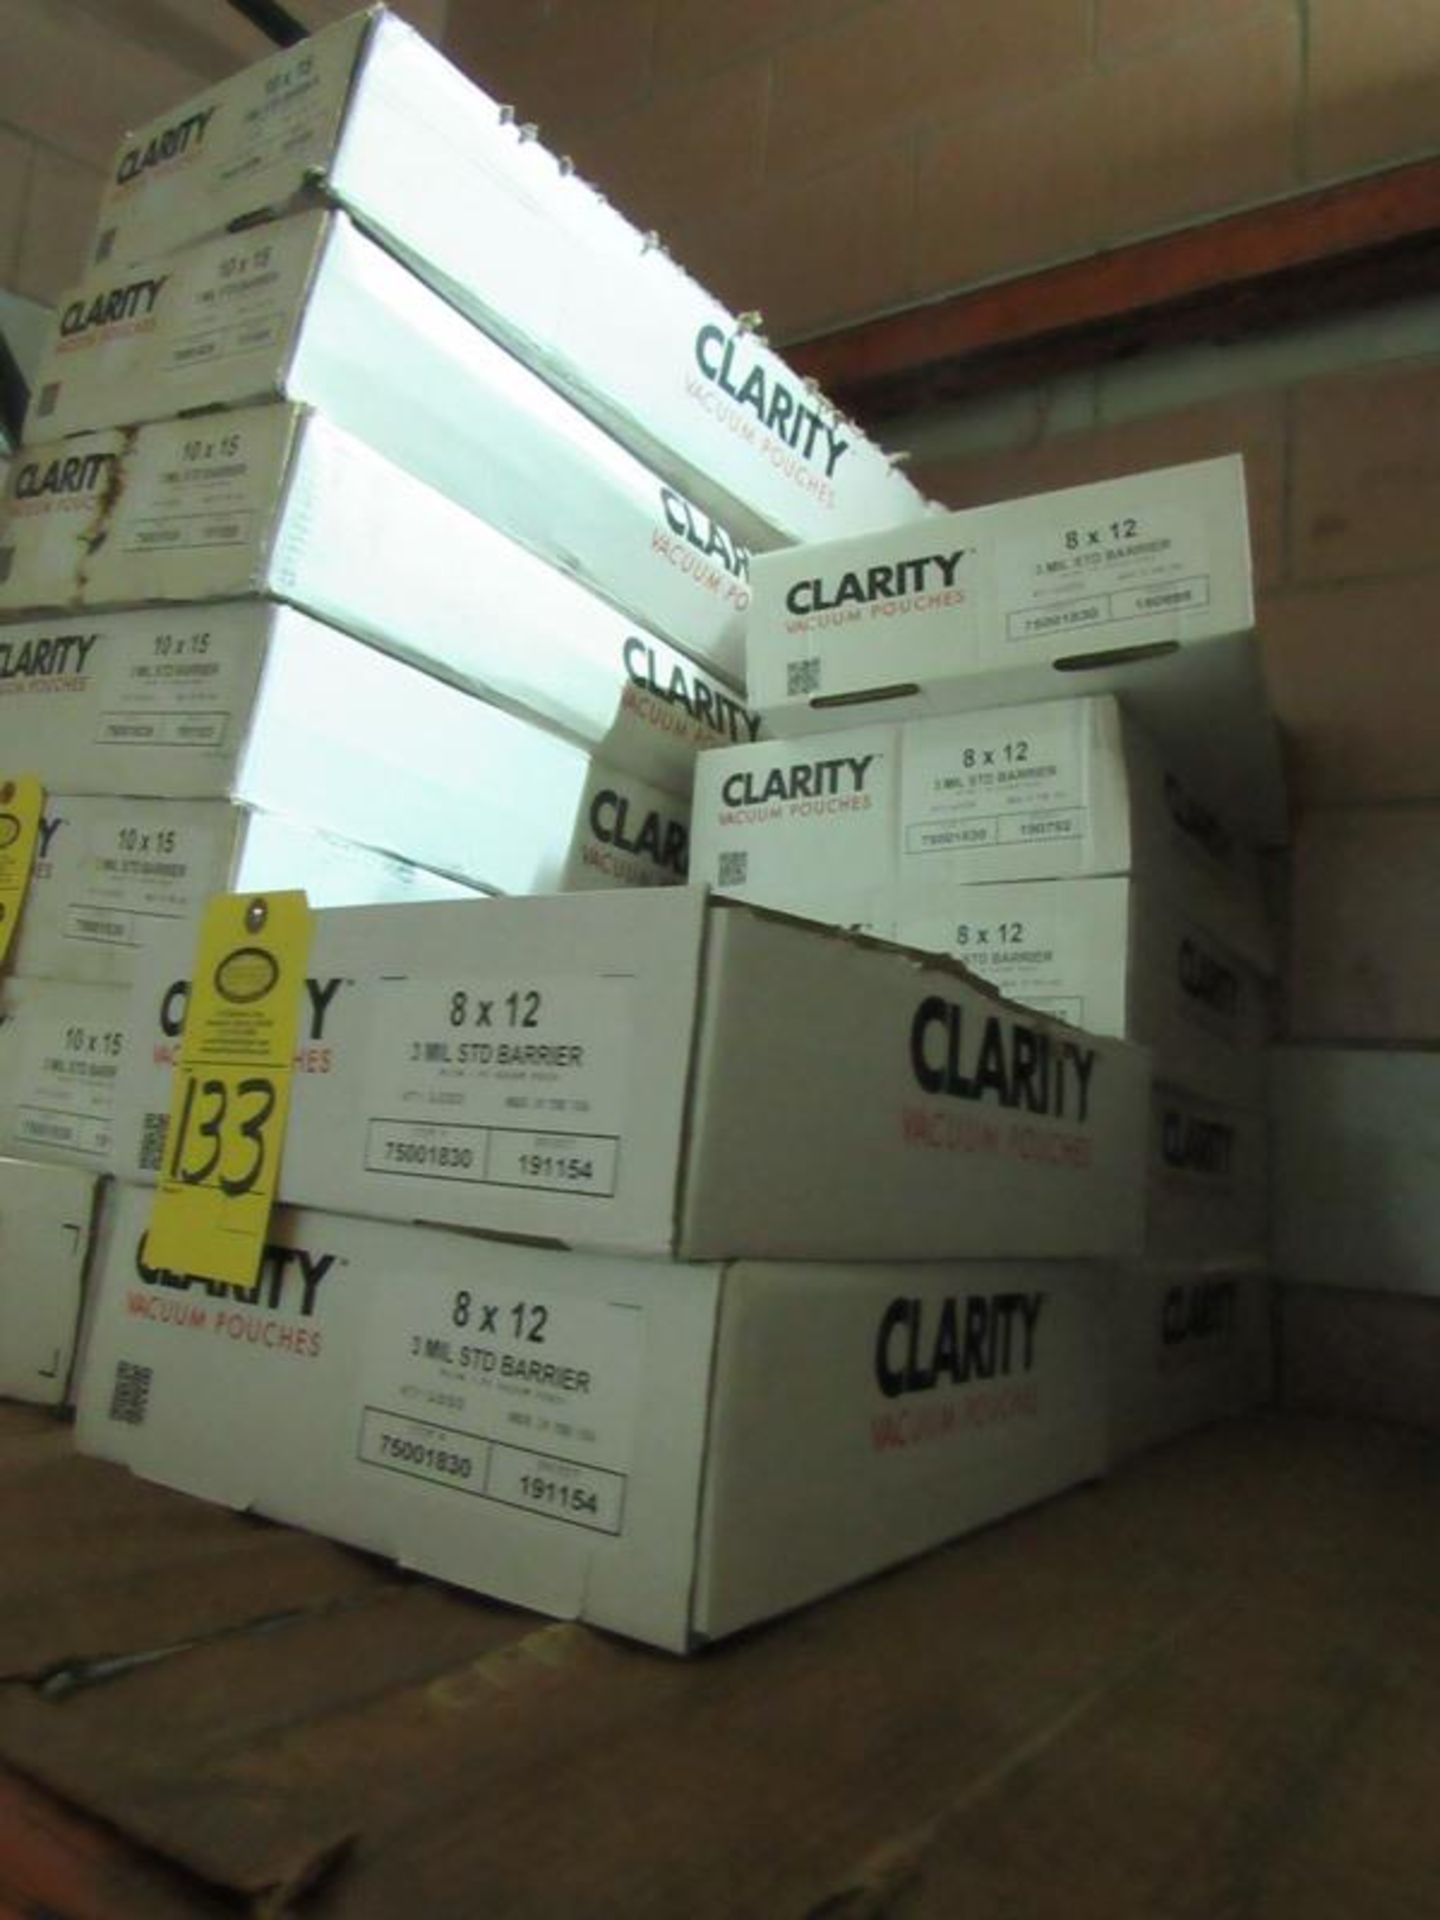 Cases Clarity Vacuum Pouches, 8 X 12 3 MIL STD Barrier 1000/cs(Required Loading Fee $10.00 - Small